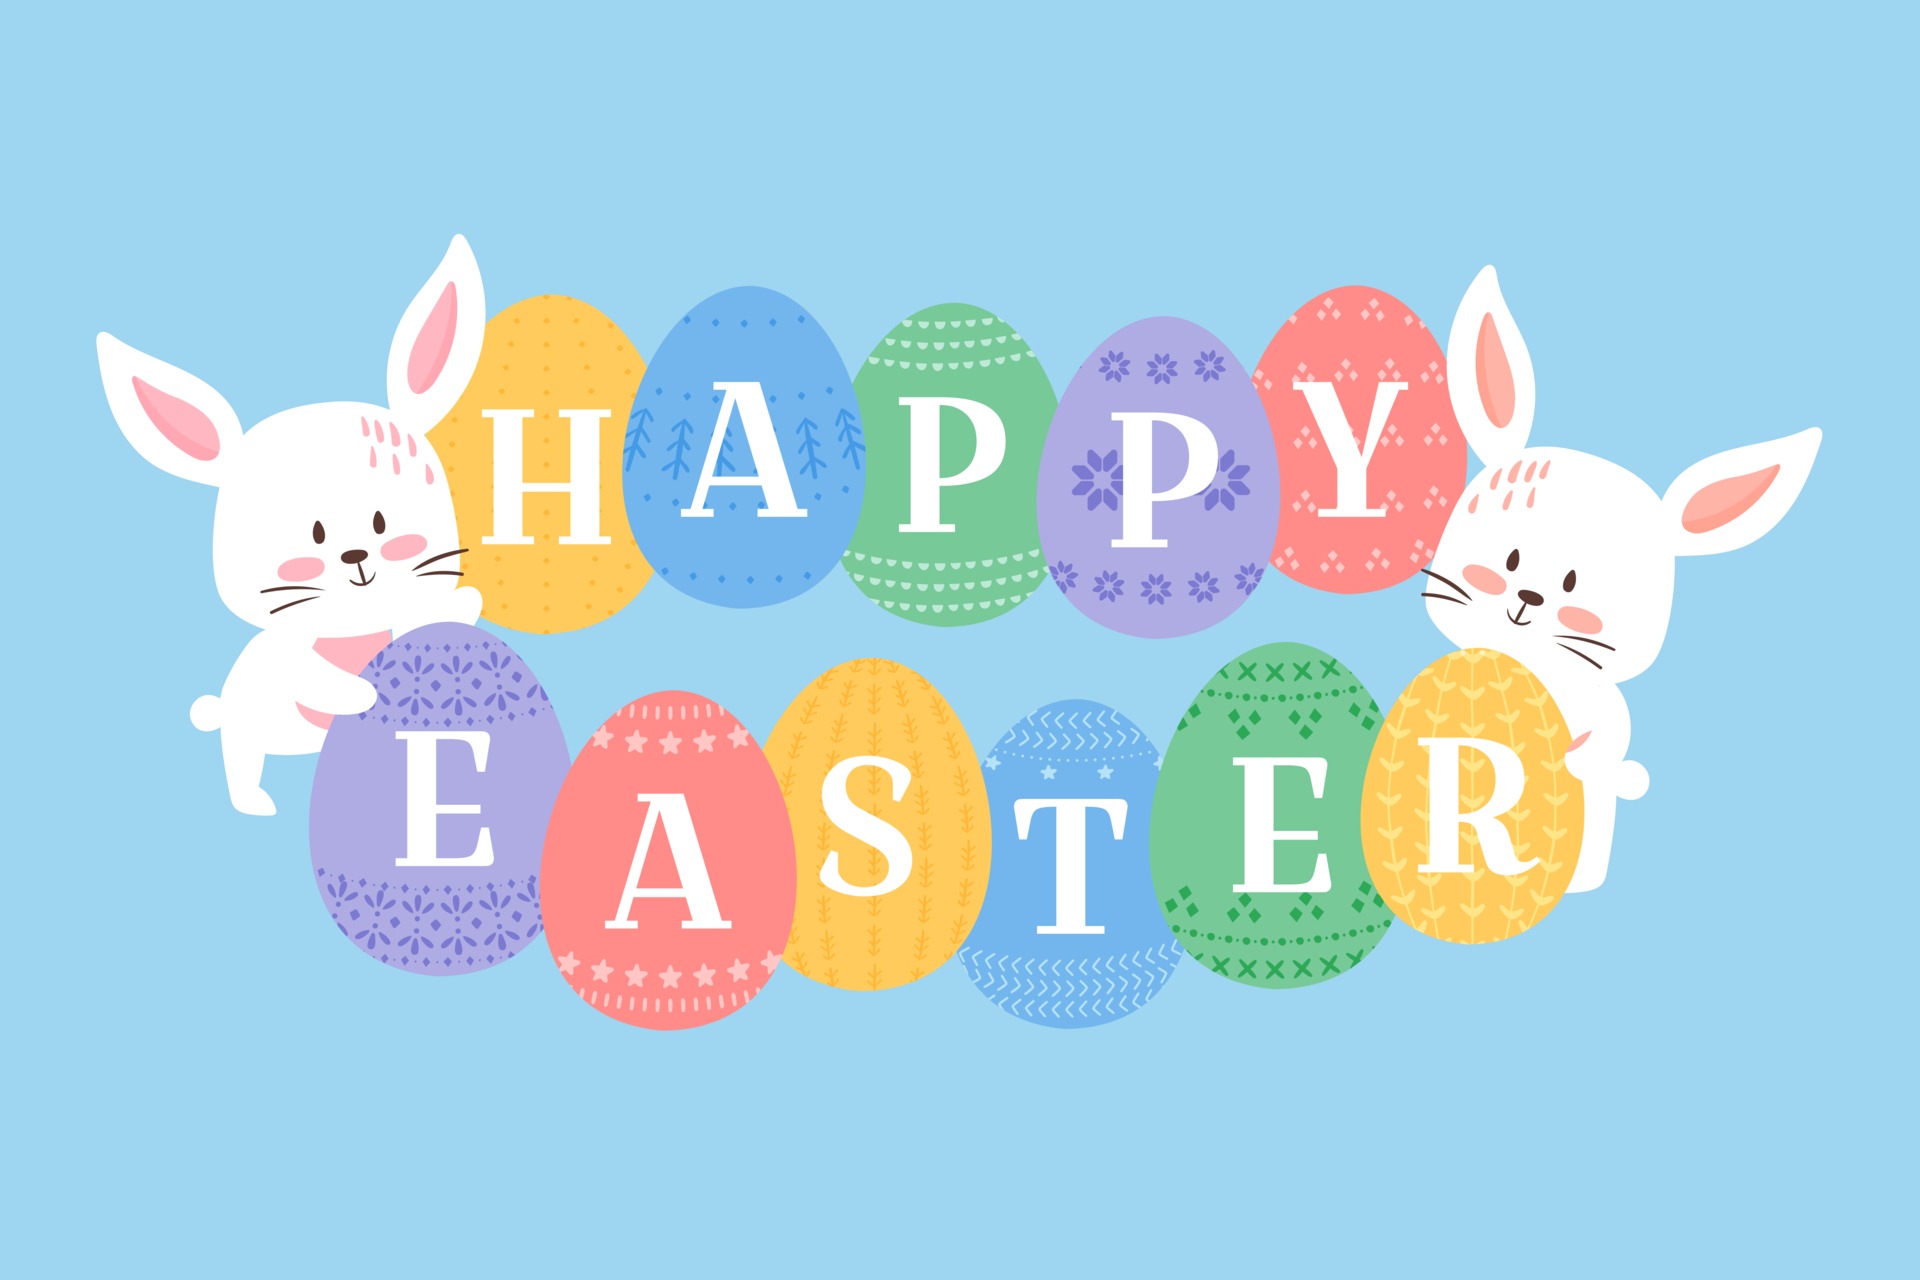 Easter background vector illustration, cute flat cartoon style. Baby rabbits with decorated eggs. Bunny holding ornated eggs with Happy Easter heading. White kitten muzzles and eggs